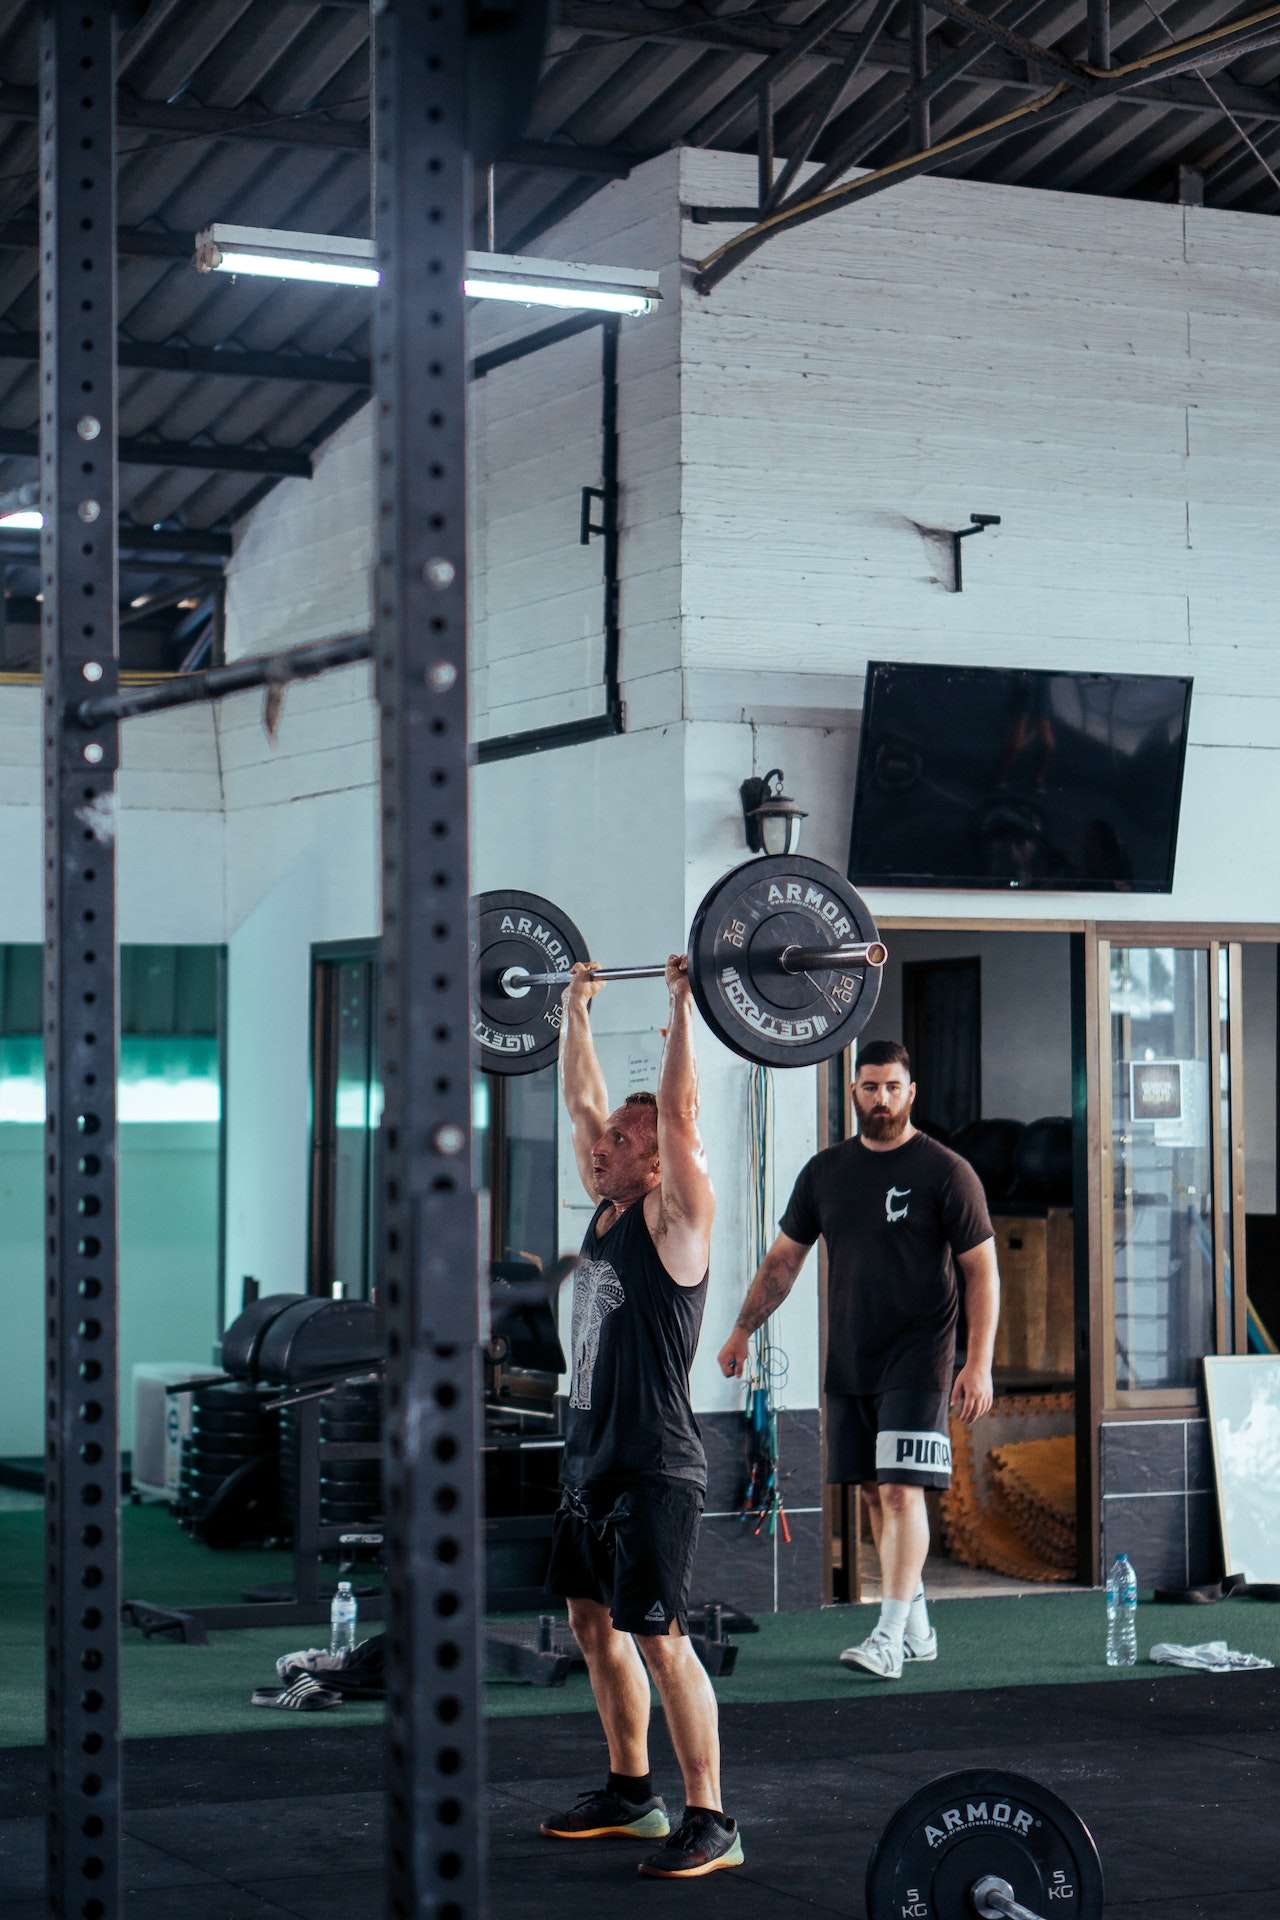 Man In Black Tank Top Lifting Barbell At The Gym 